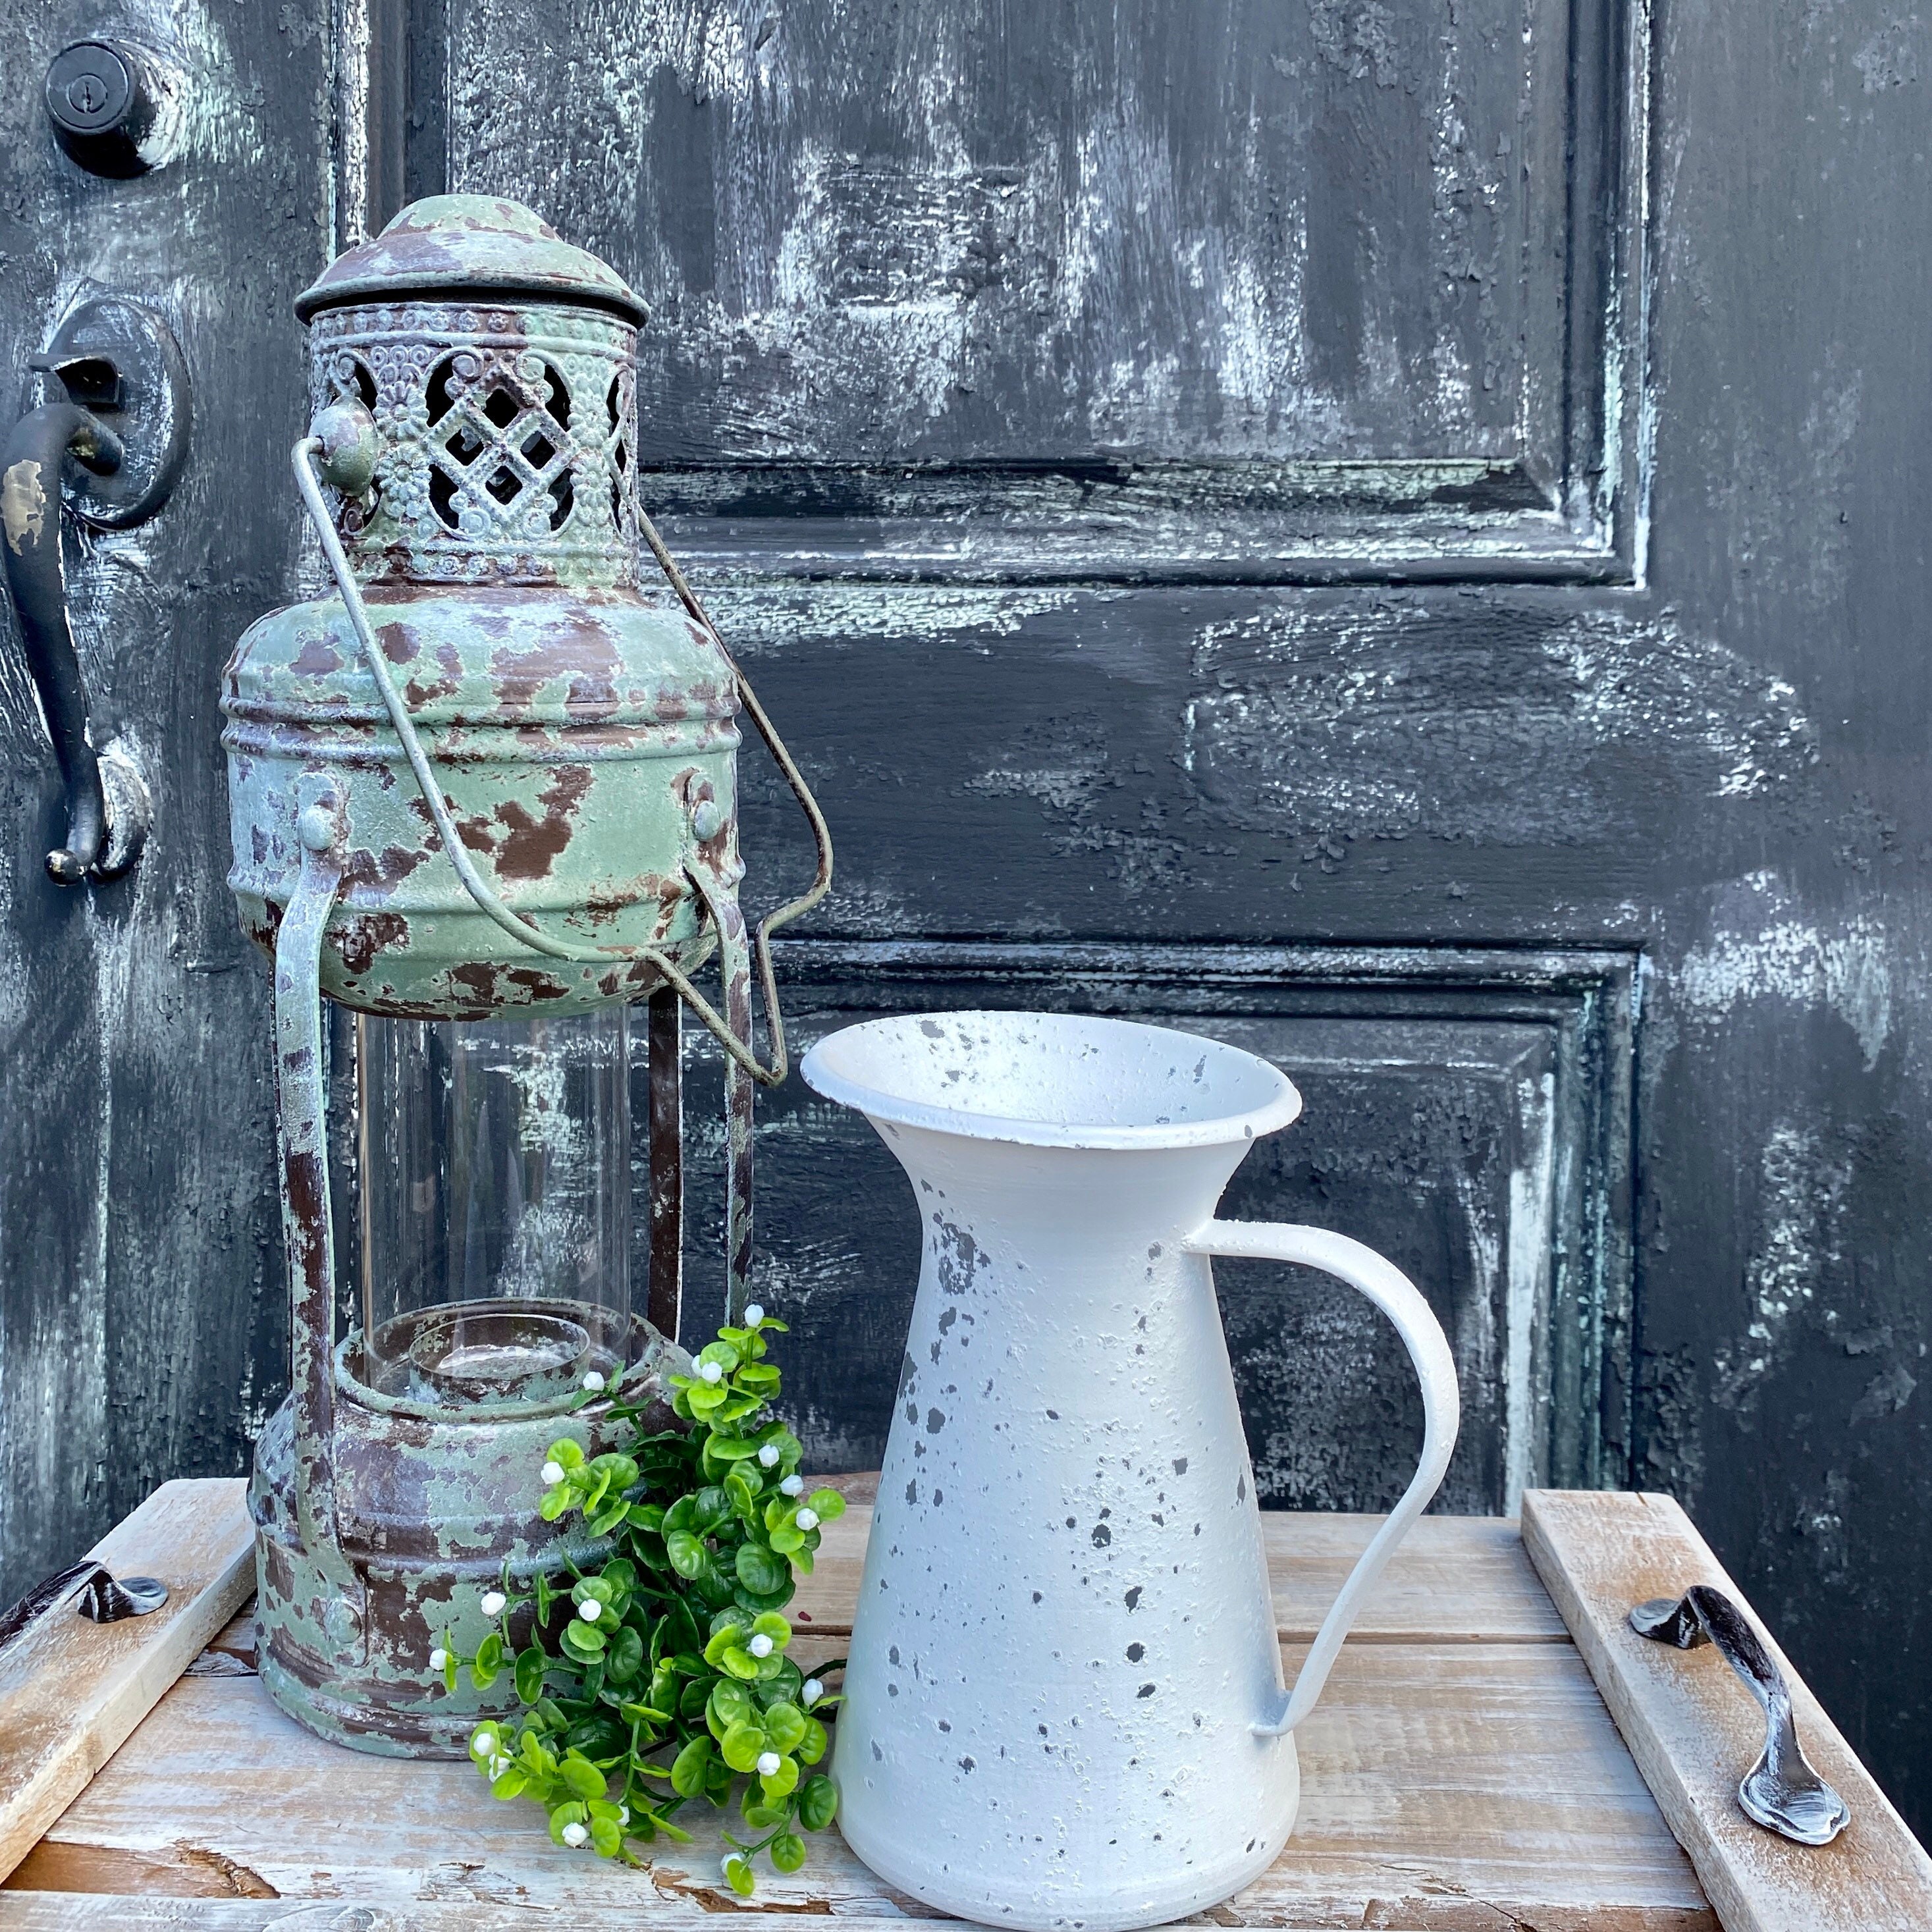 at Home Honeybloom White Metal Distressed Pitcher, 15.5